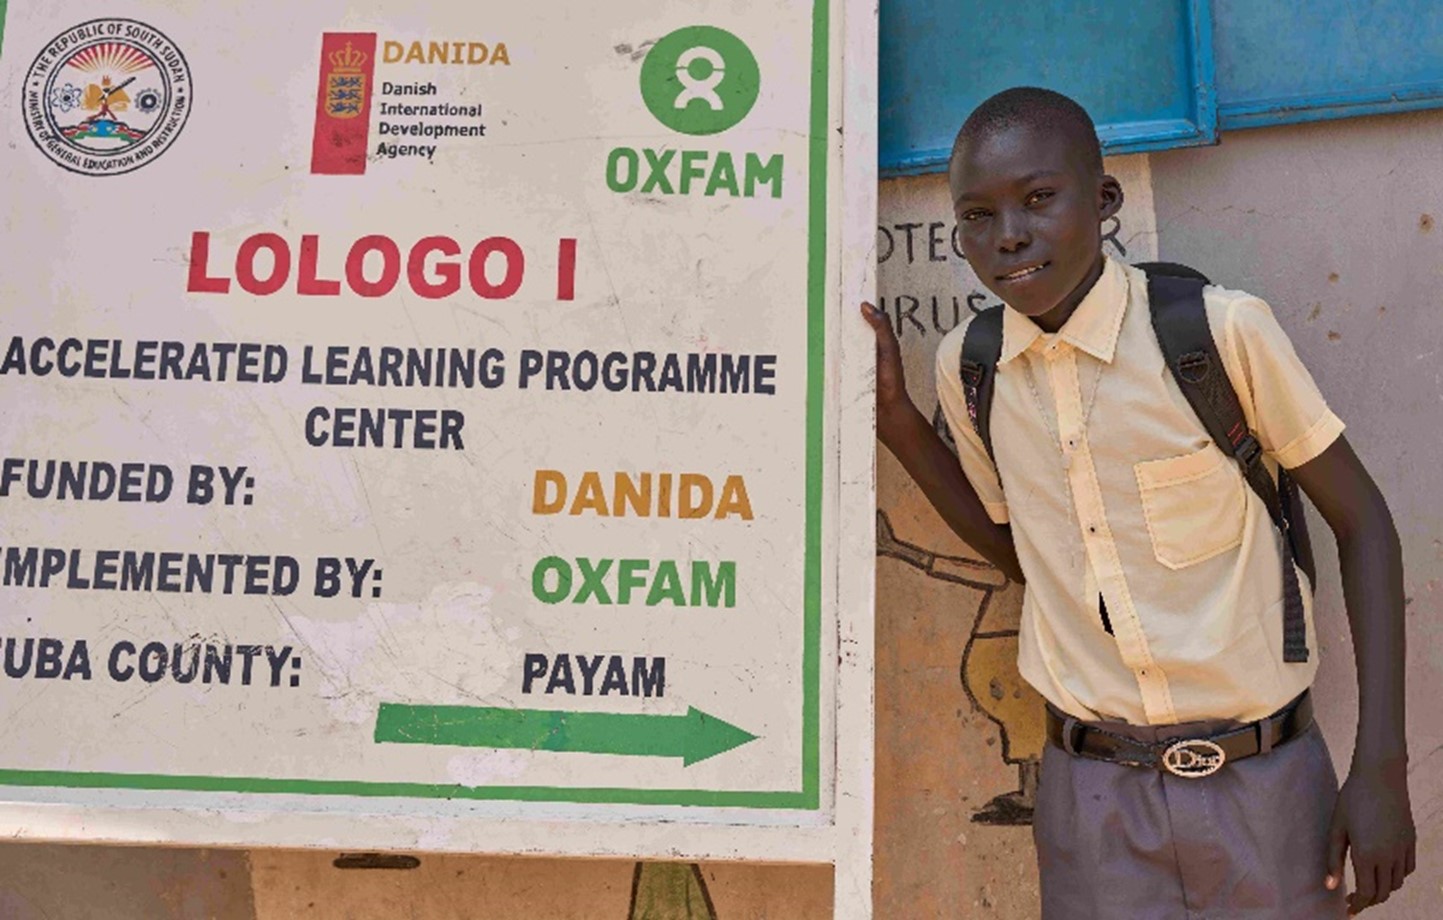 A young boy stands in front of his school's information sign. He is wearing a pale yellow button up shirt, dark blue pants, and a backpack.